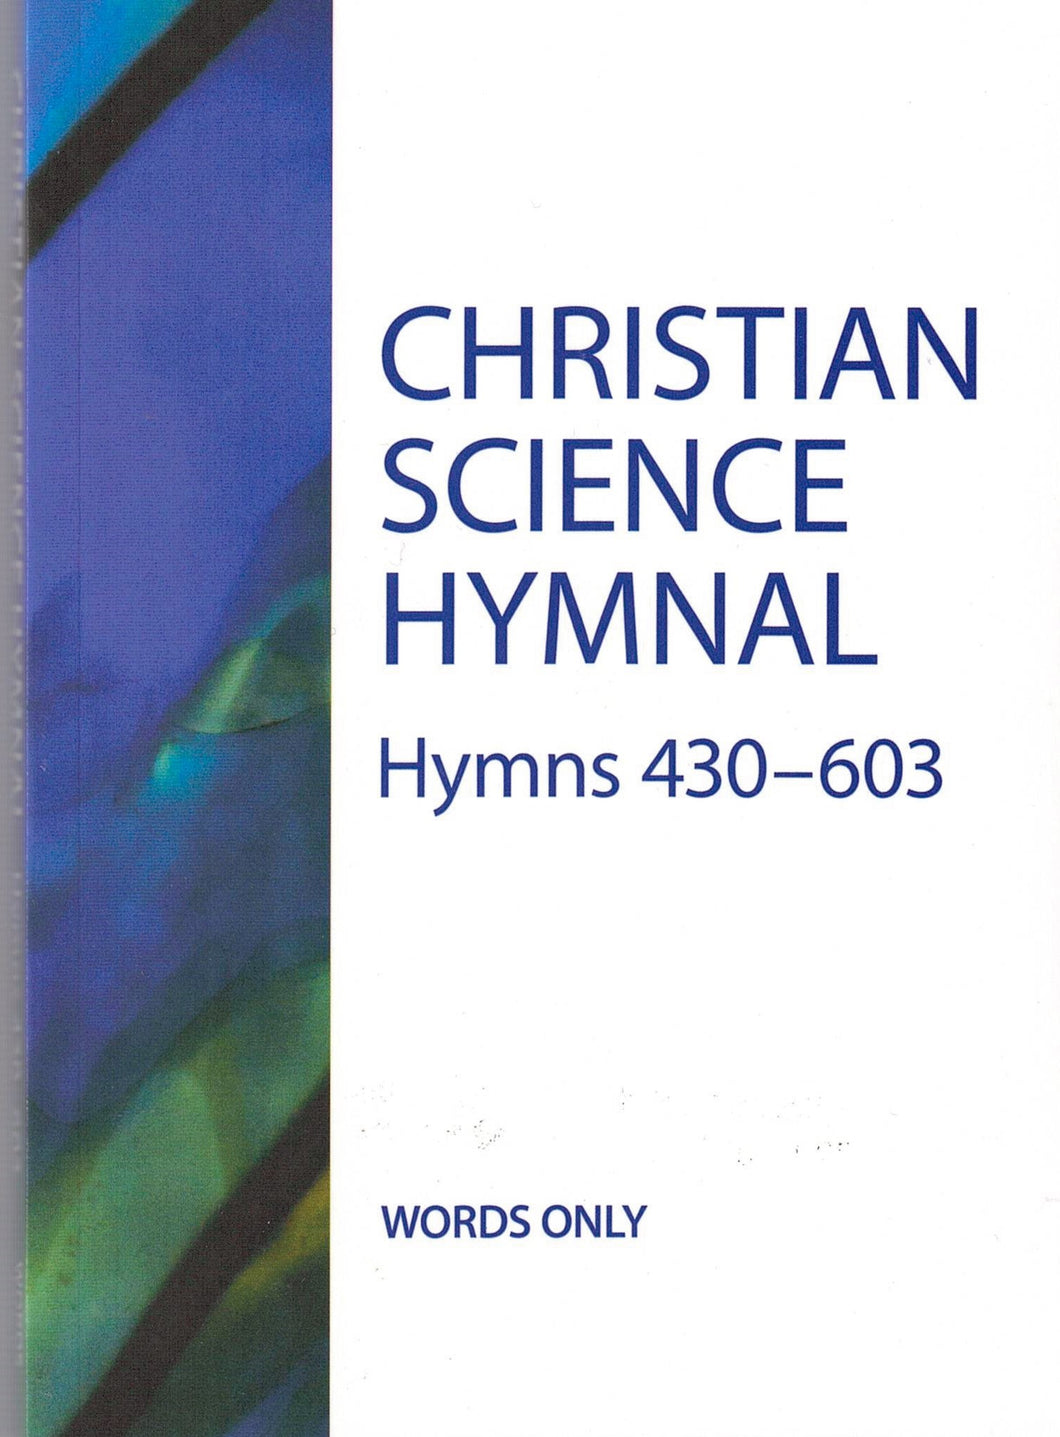 Words Only - Christian Science Hymnal: Hymns 430-603